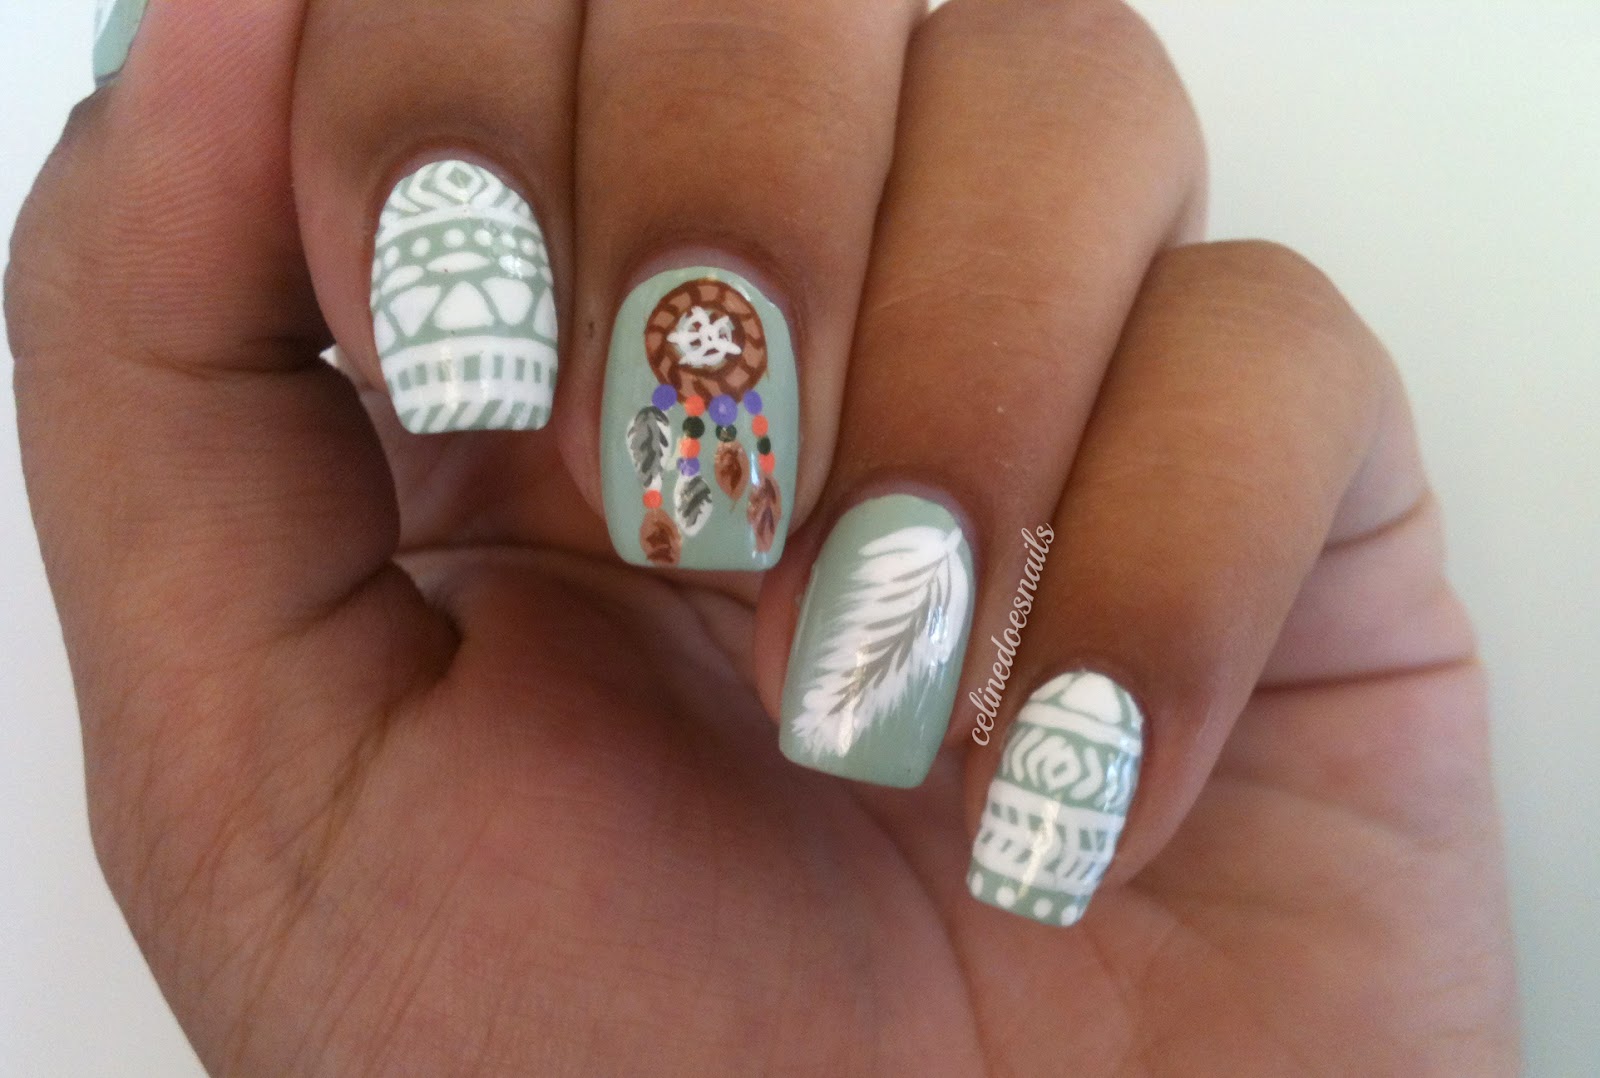 2. Step by Step Tribal Nail Art - wide 3